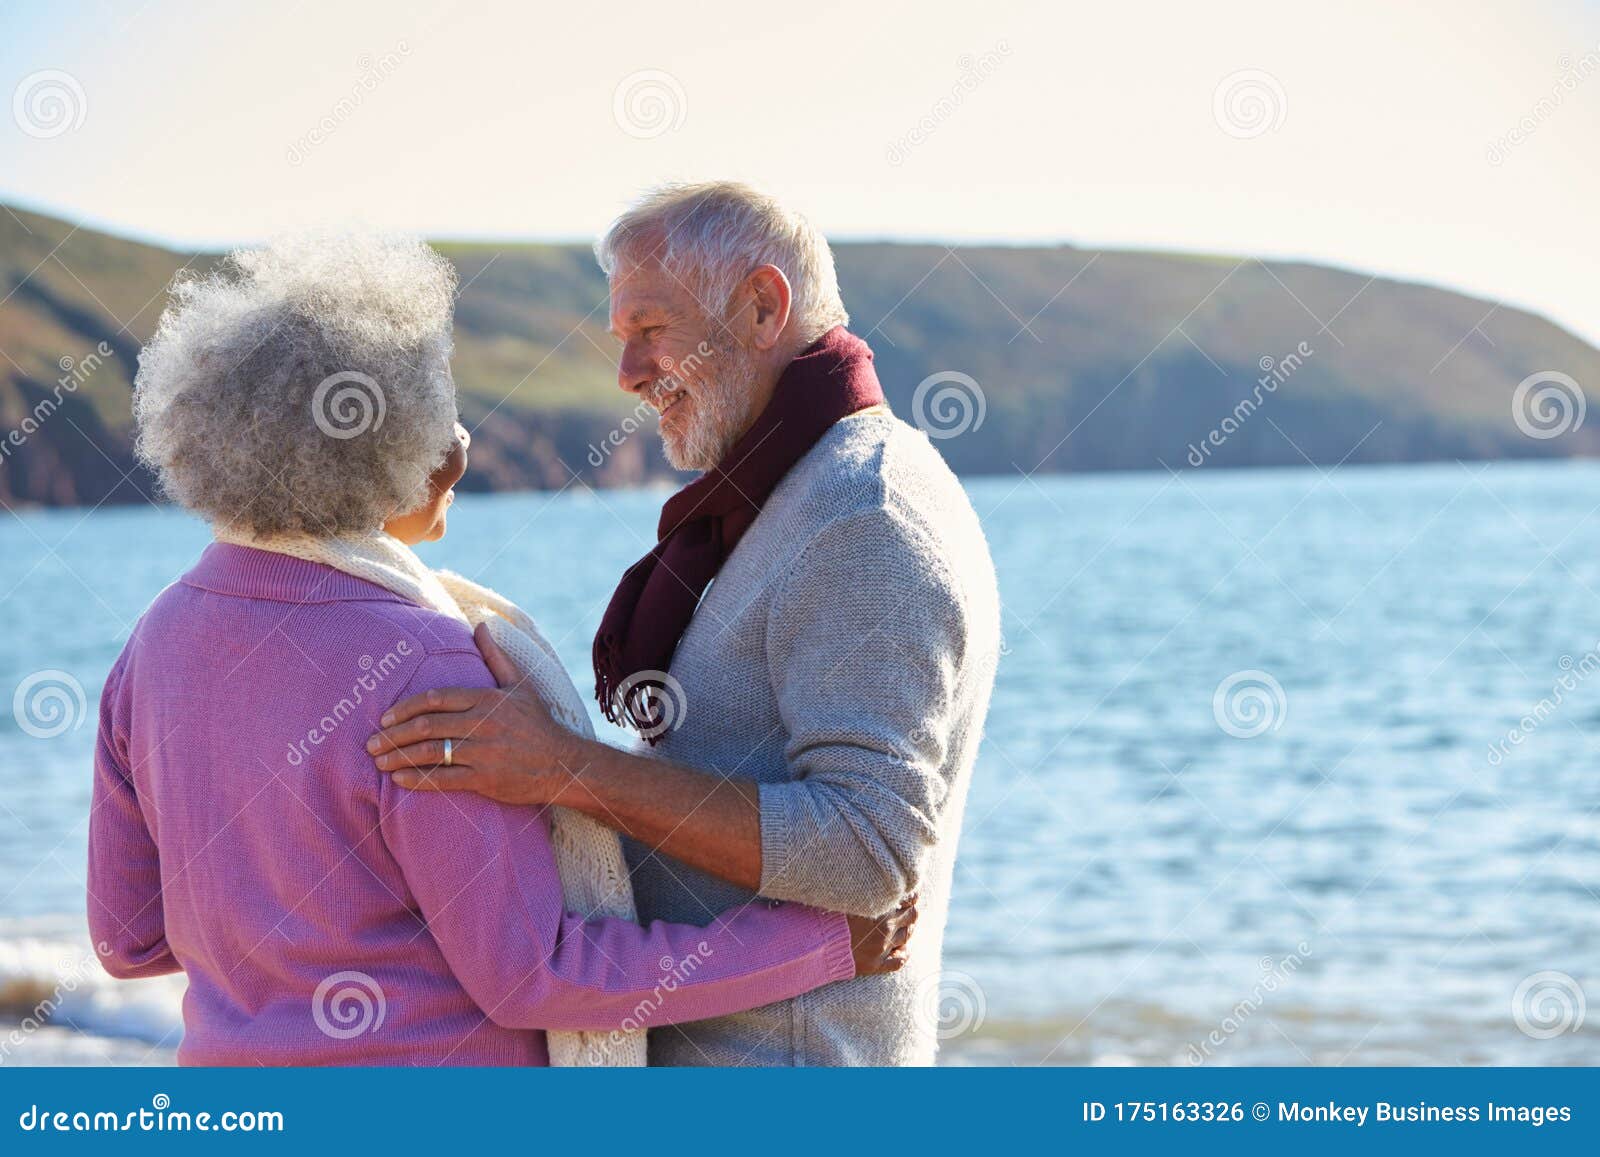 couple hugging standing on shore photo - Free Nature Image 